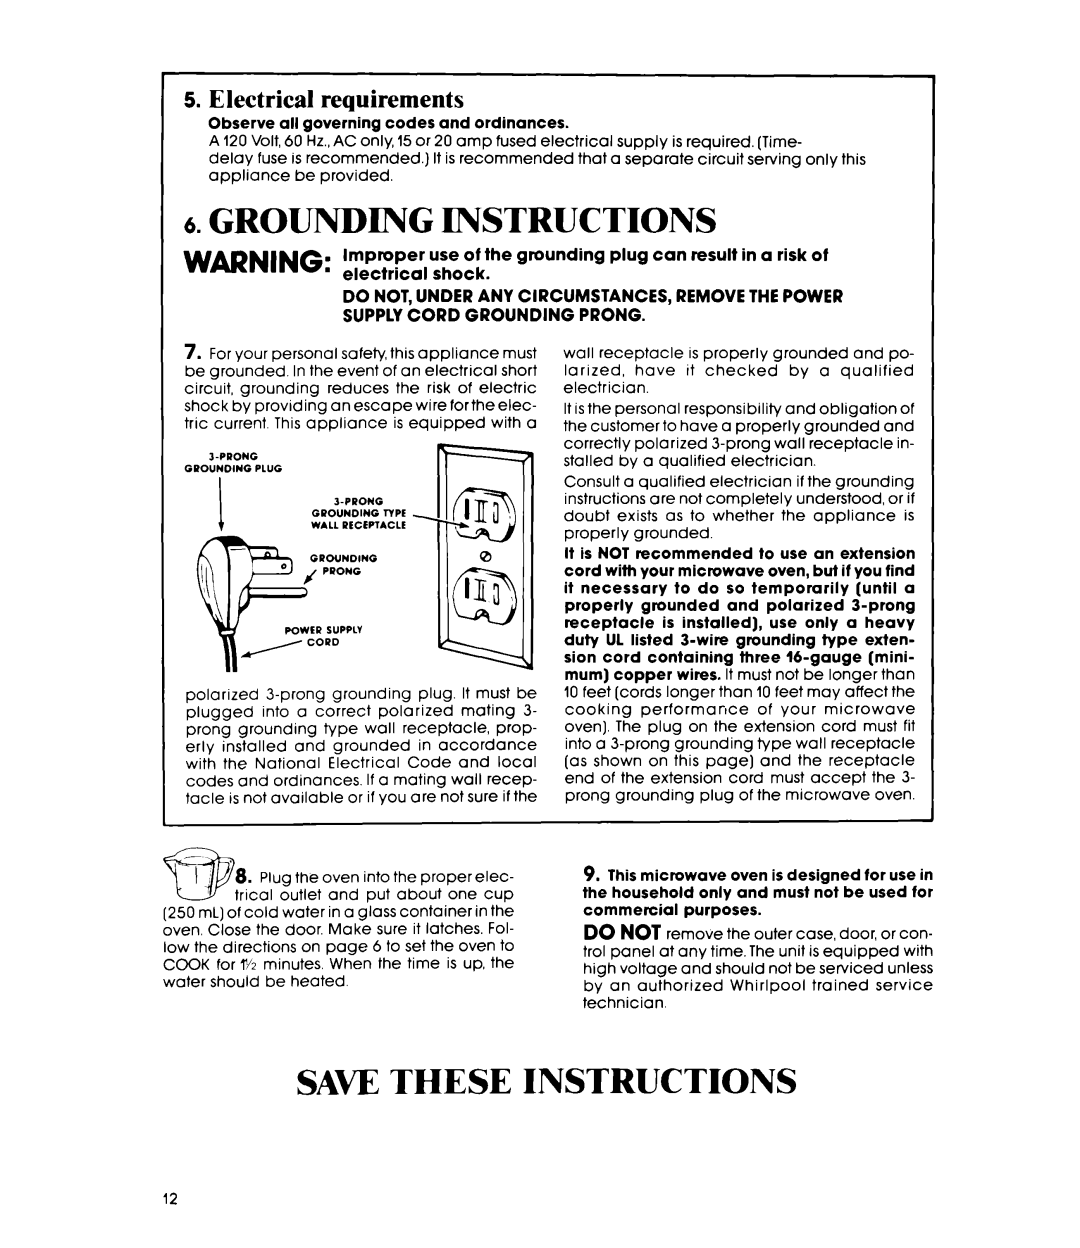 Whirlpool MW840EXR, MW8400XR manual Grounding Instructions, Saw These Instructions, Electrical requirements 